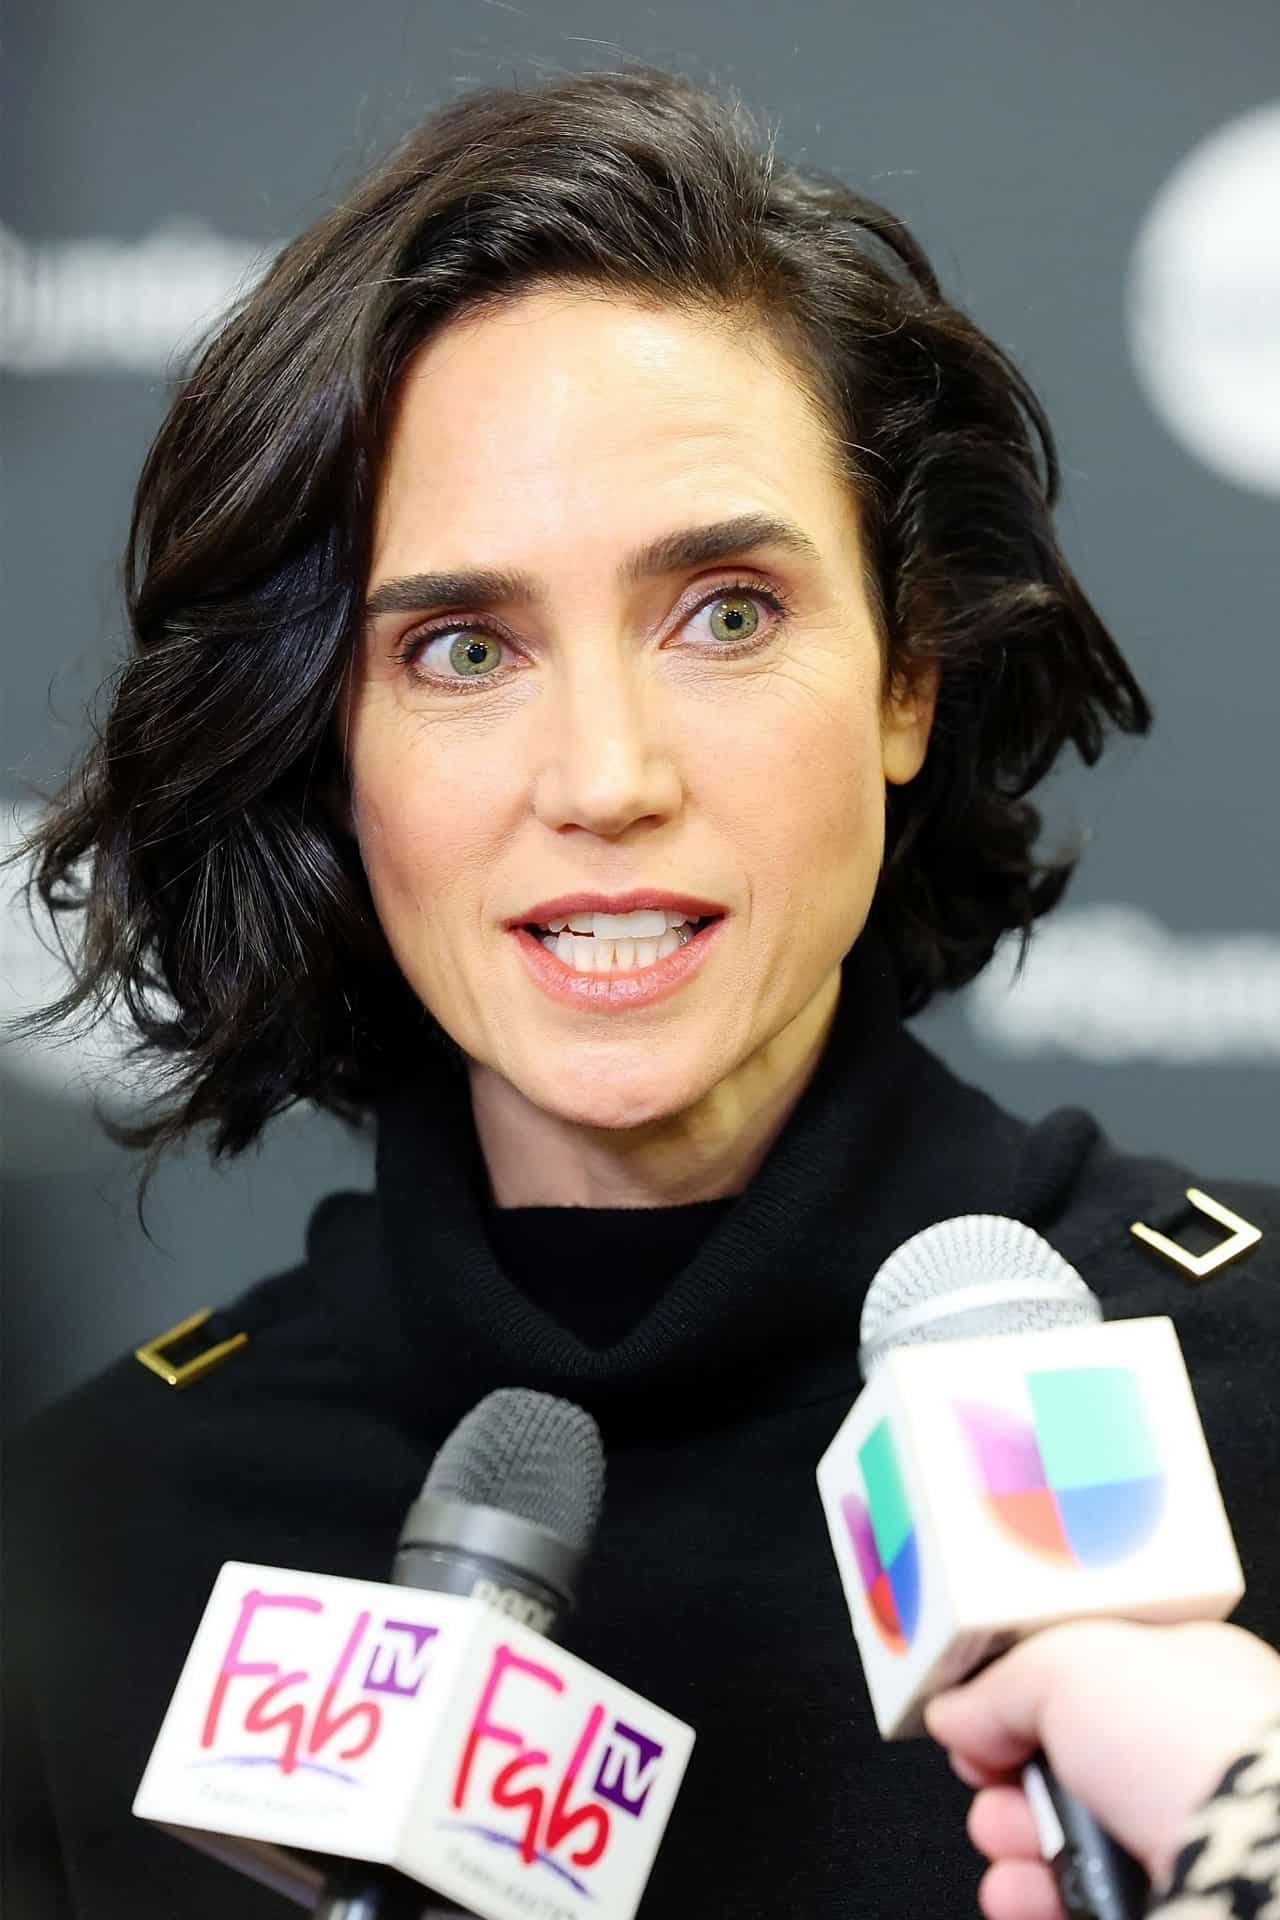 Jennifer Connelly Stuns in Mini Skirt and Sweater at Sundance Film Festival